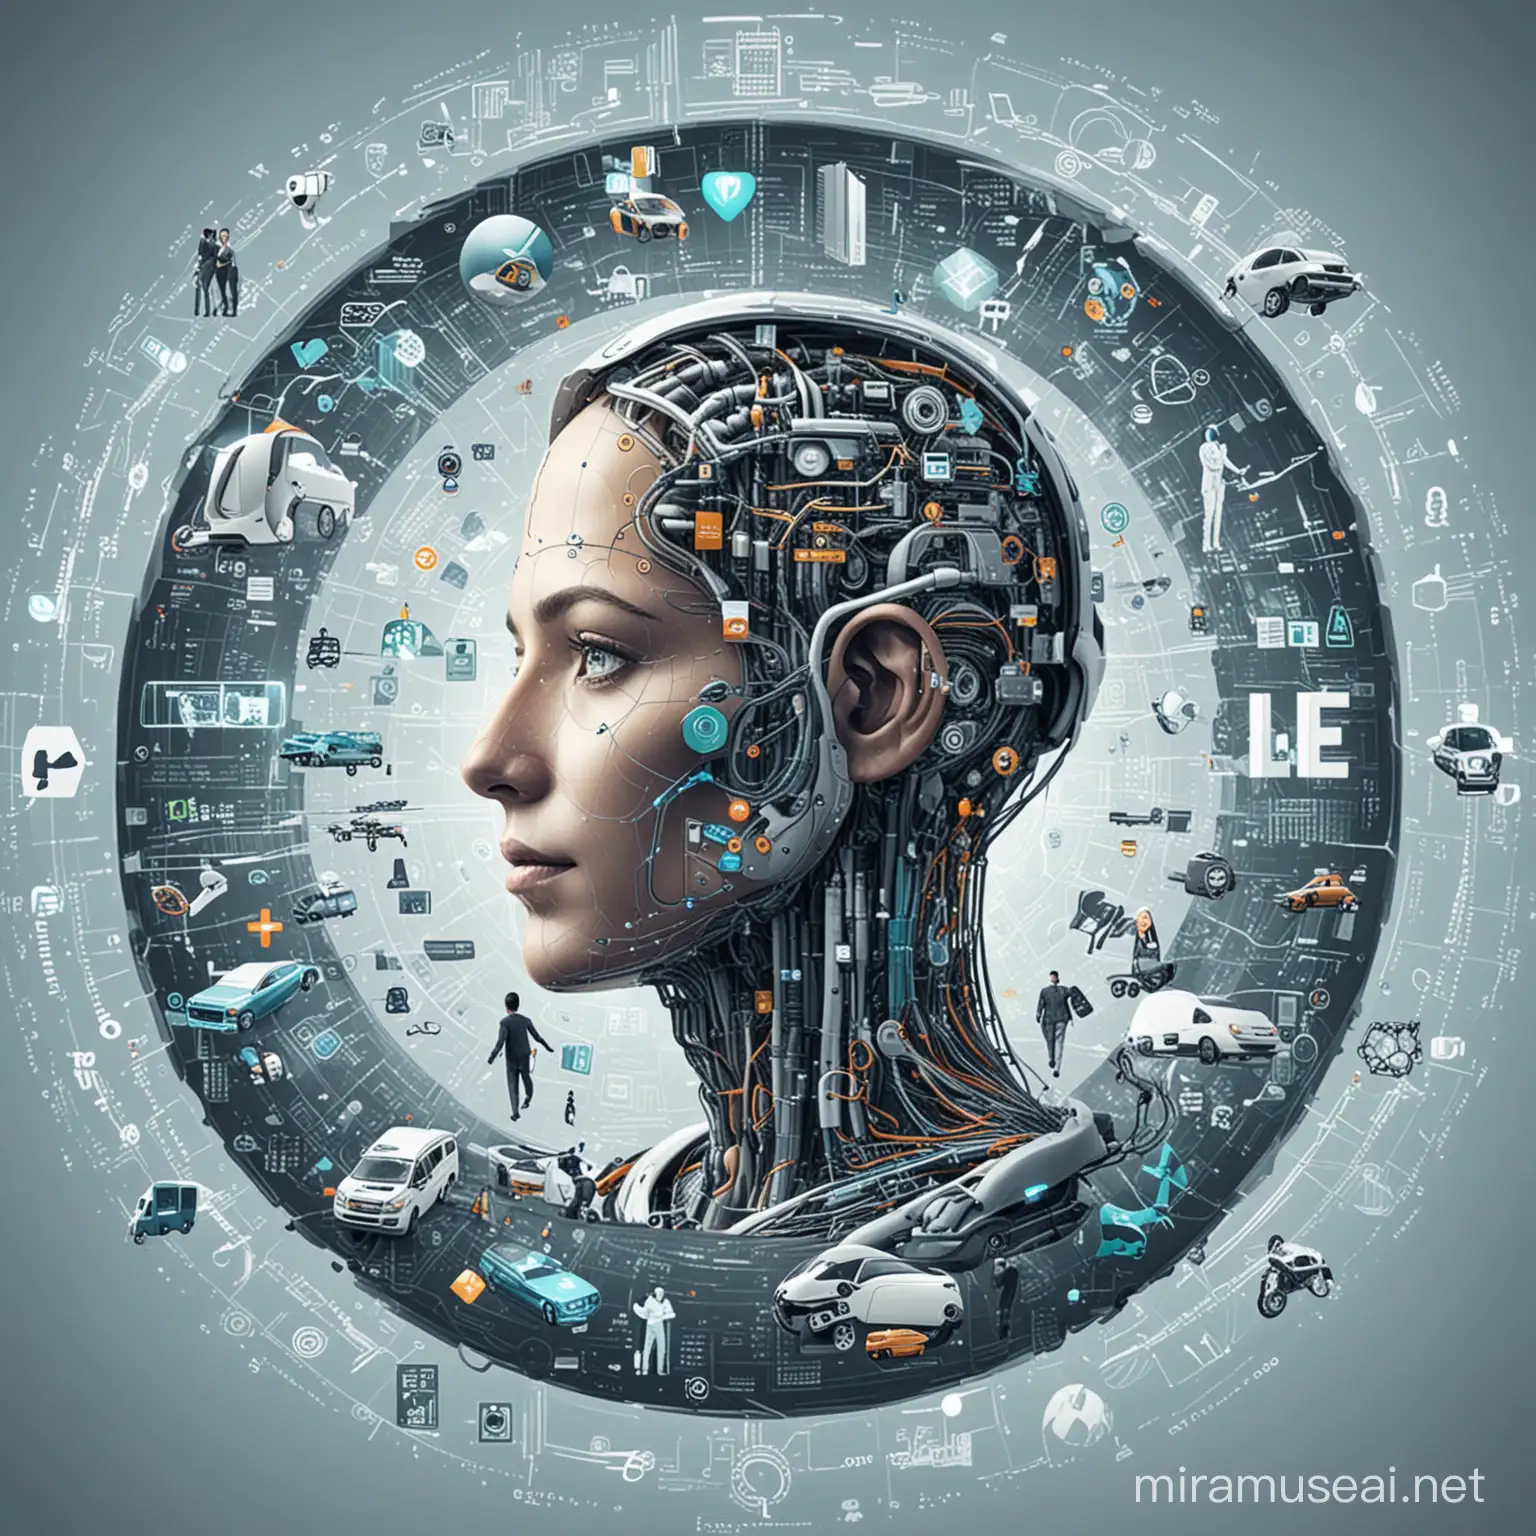 A futuristic image depicting the integration of AI in various aspects of life, such as healthcare, finance, and transportation.